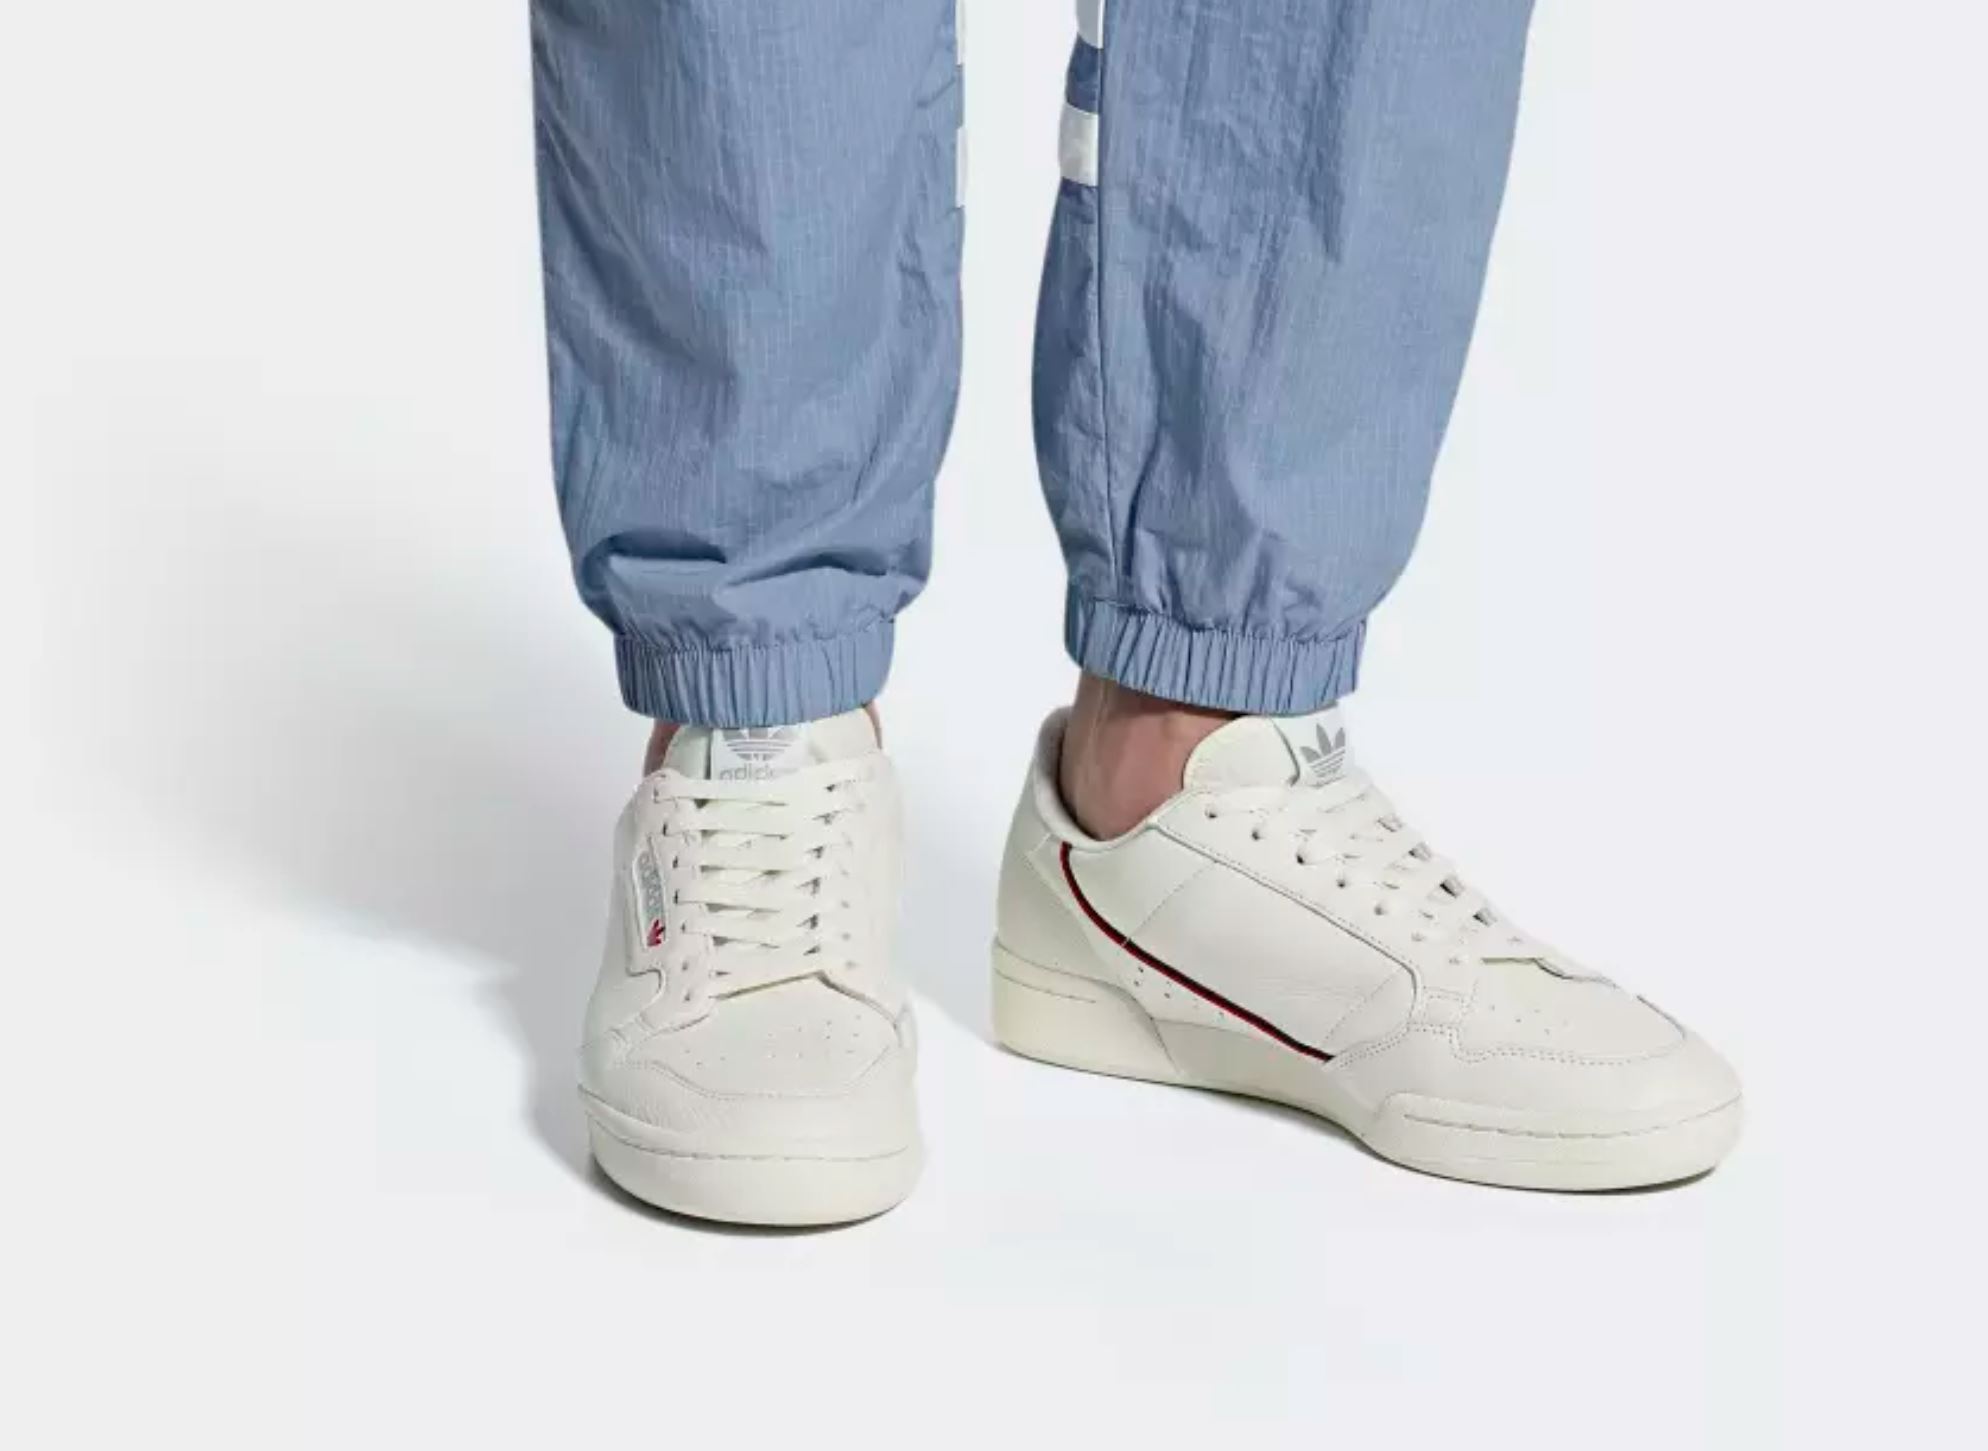 adidas continental 80 off white